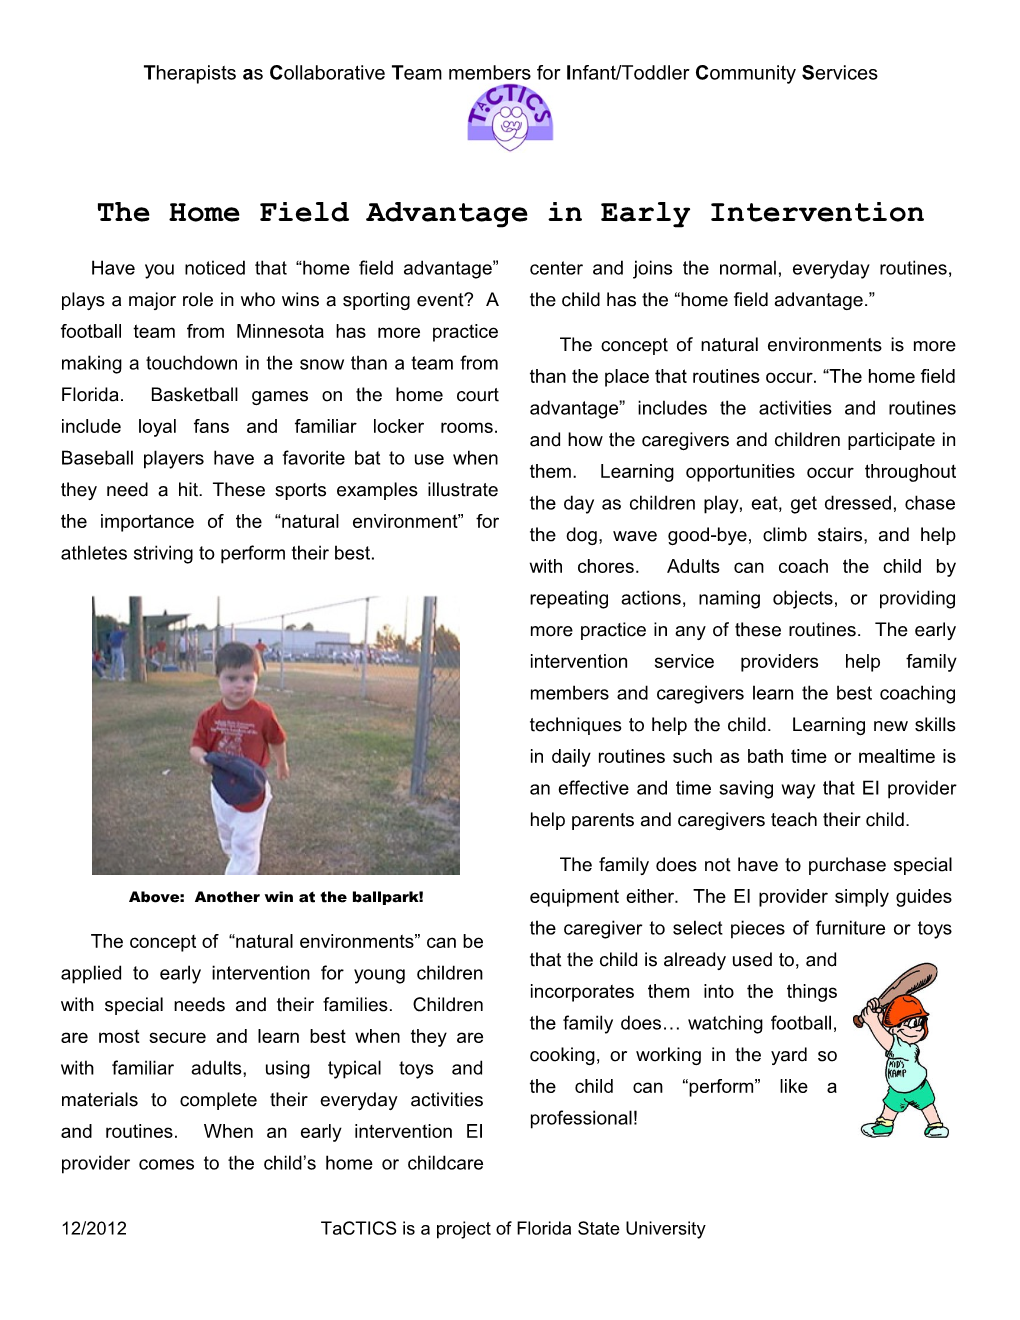 The Home Field Advantage in Early Intervention